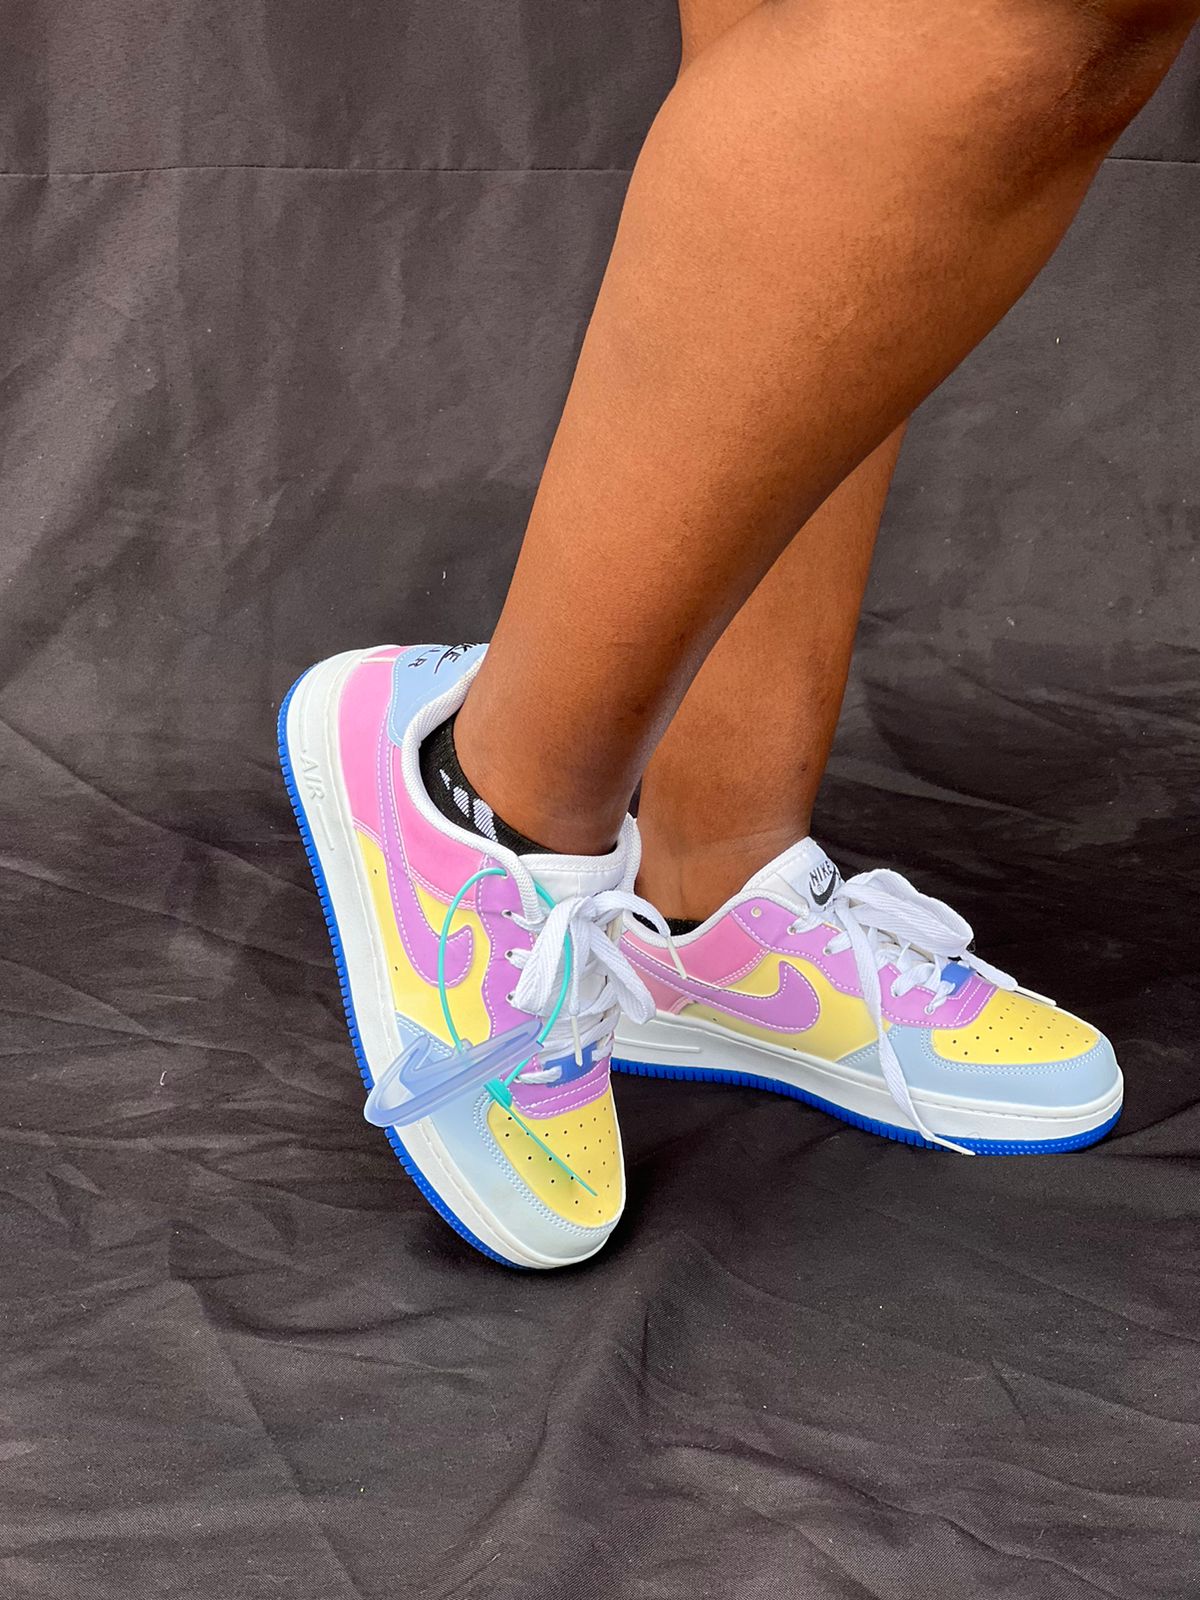 The new Nike Air Force 1 UV that changes color in the sun